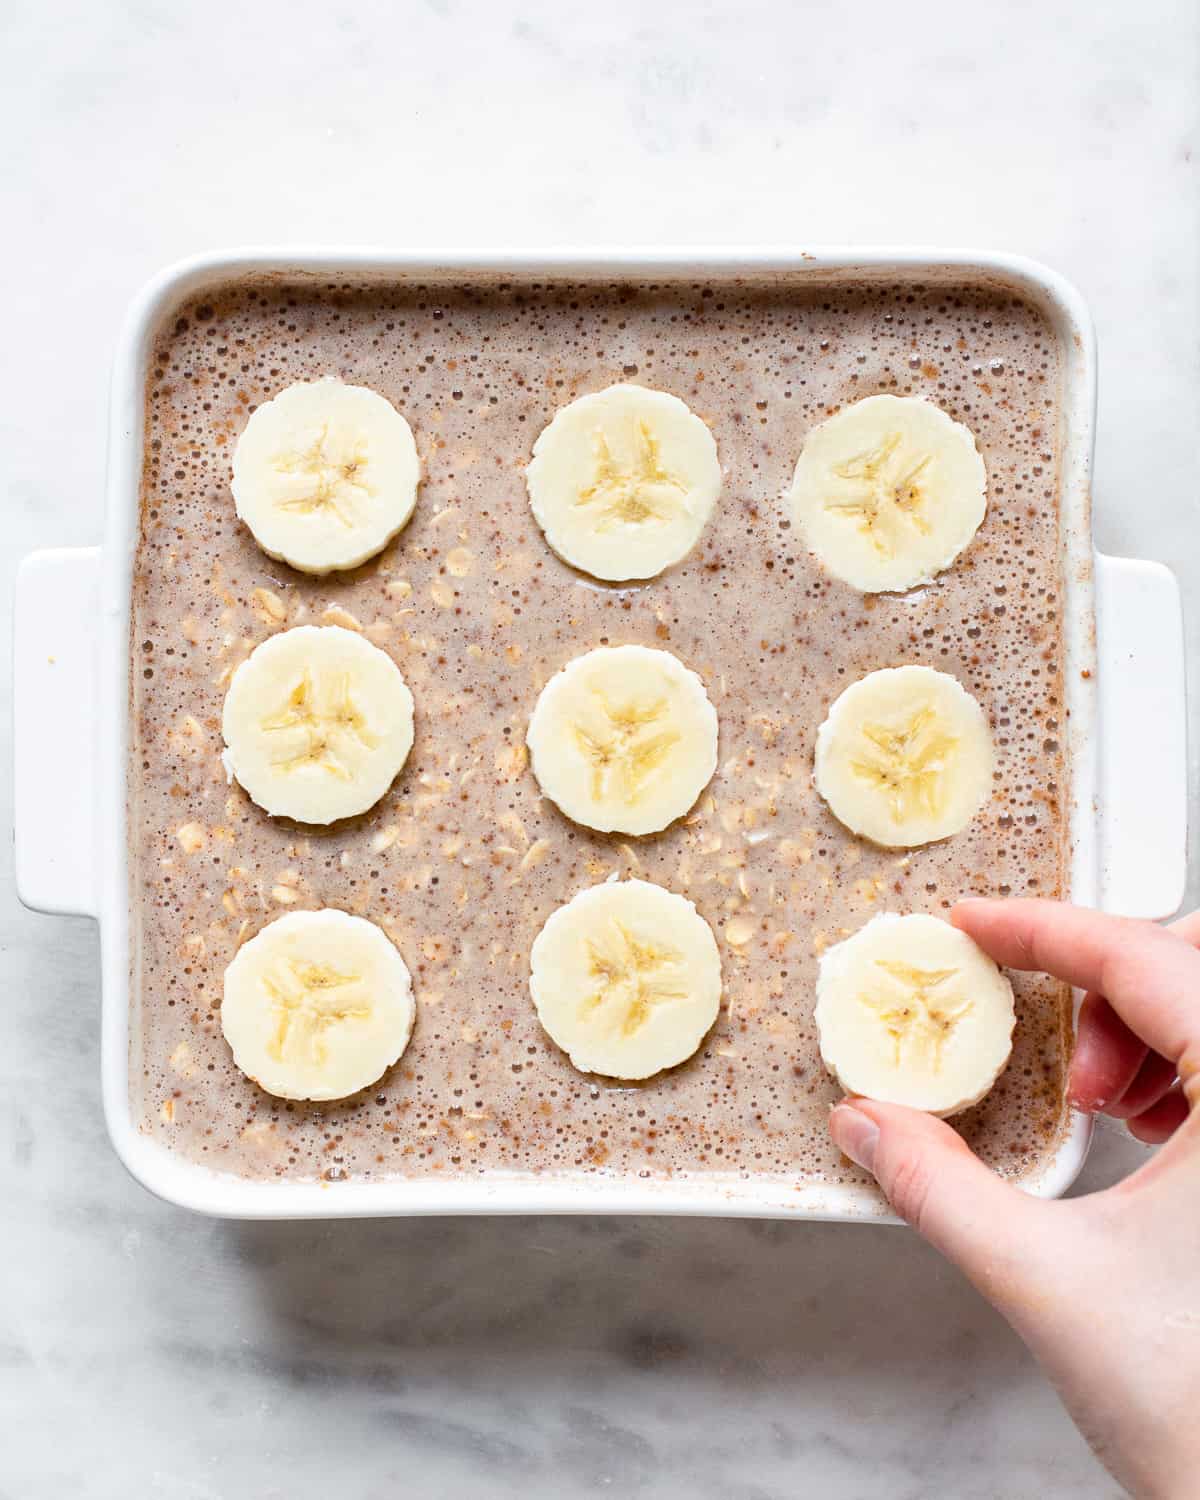 Unbaked oatmeal in a white baking dish topped with banana slices.